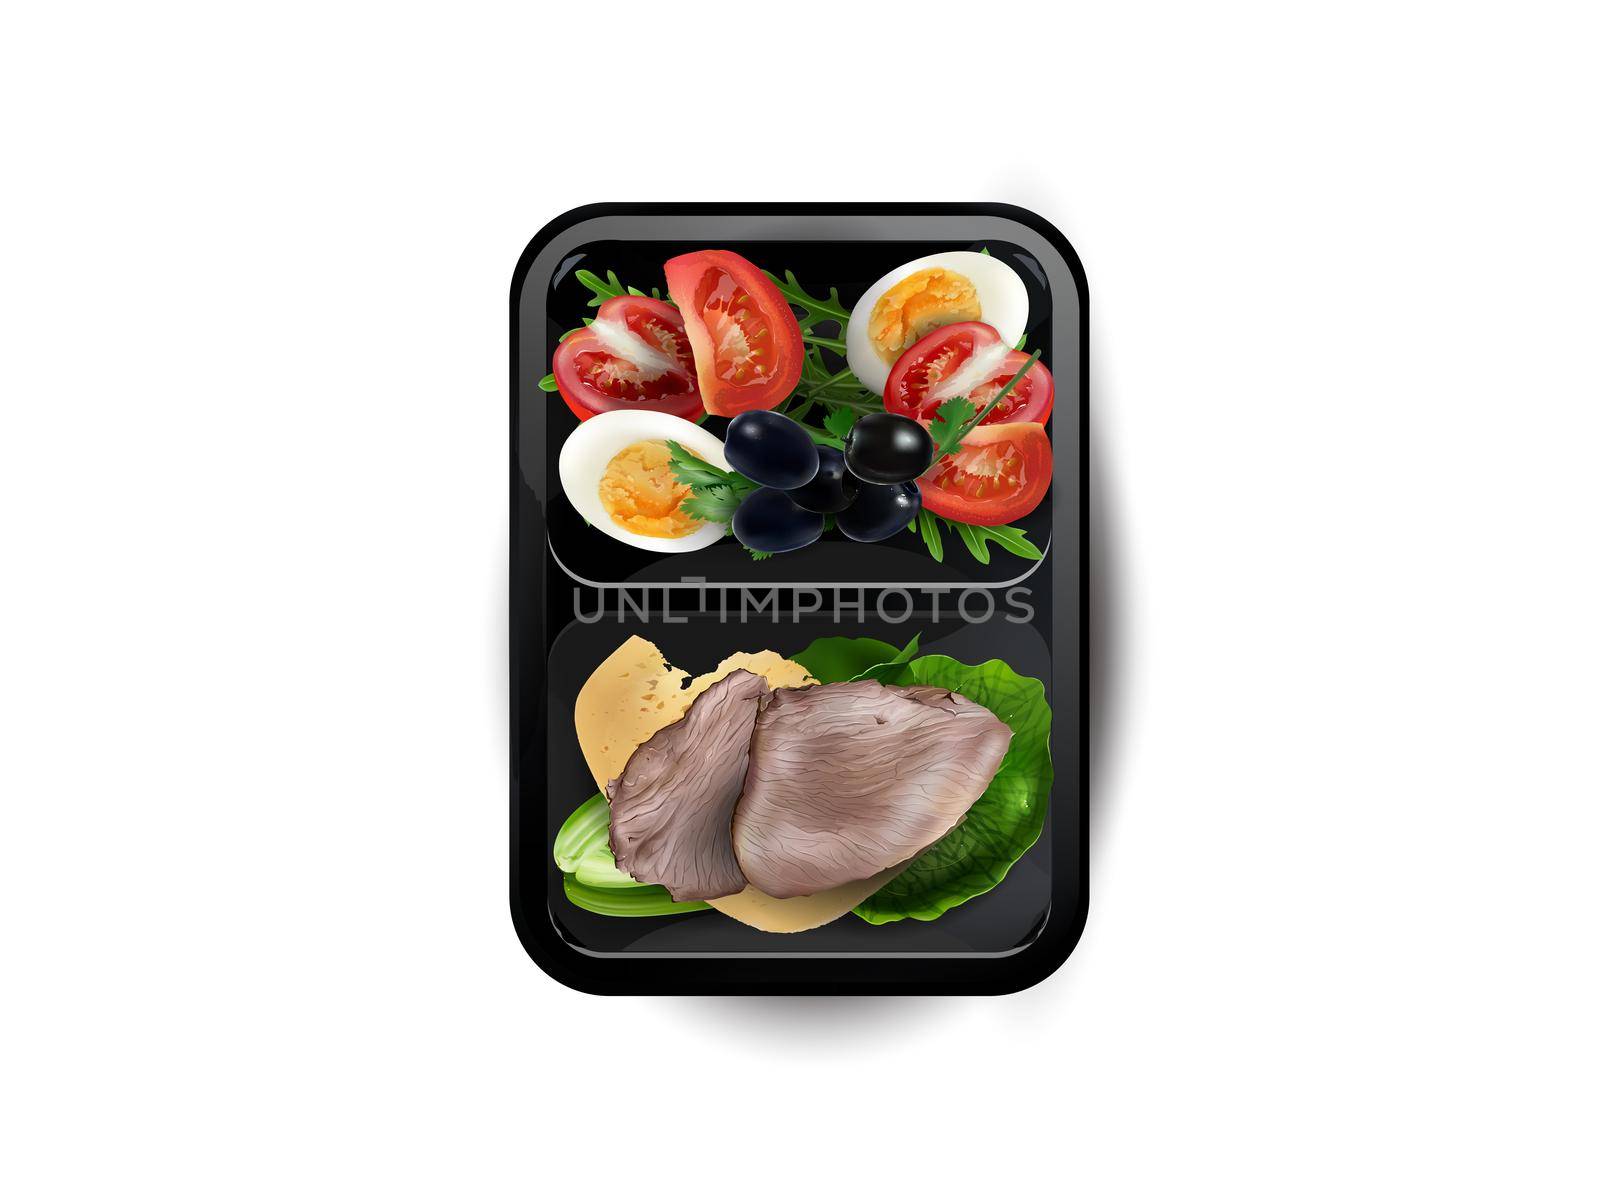 Boiled turkey meat with vegetables, egg and cheese in a lunchbox on a white background, top view. Realistic style illustration.